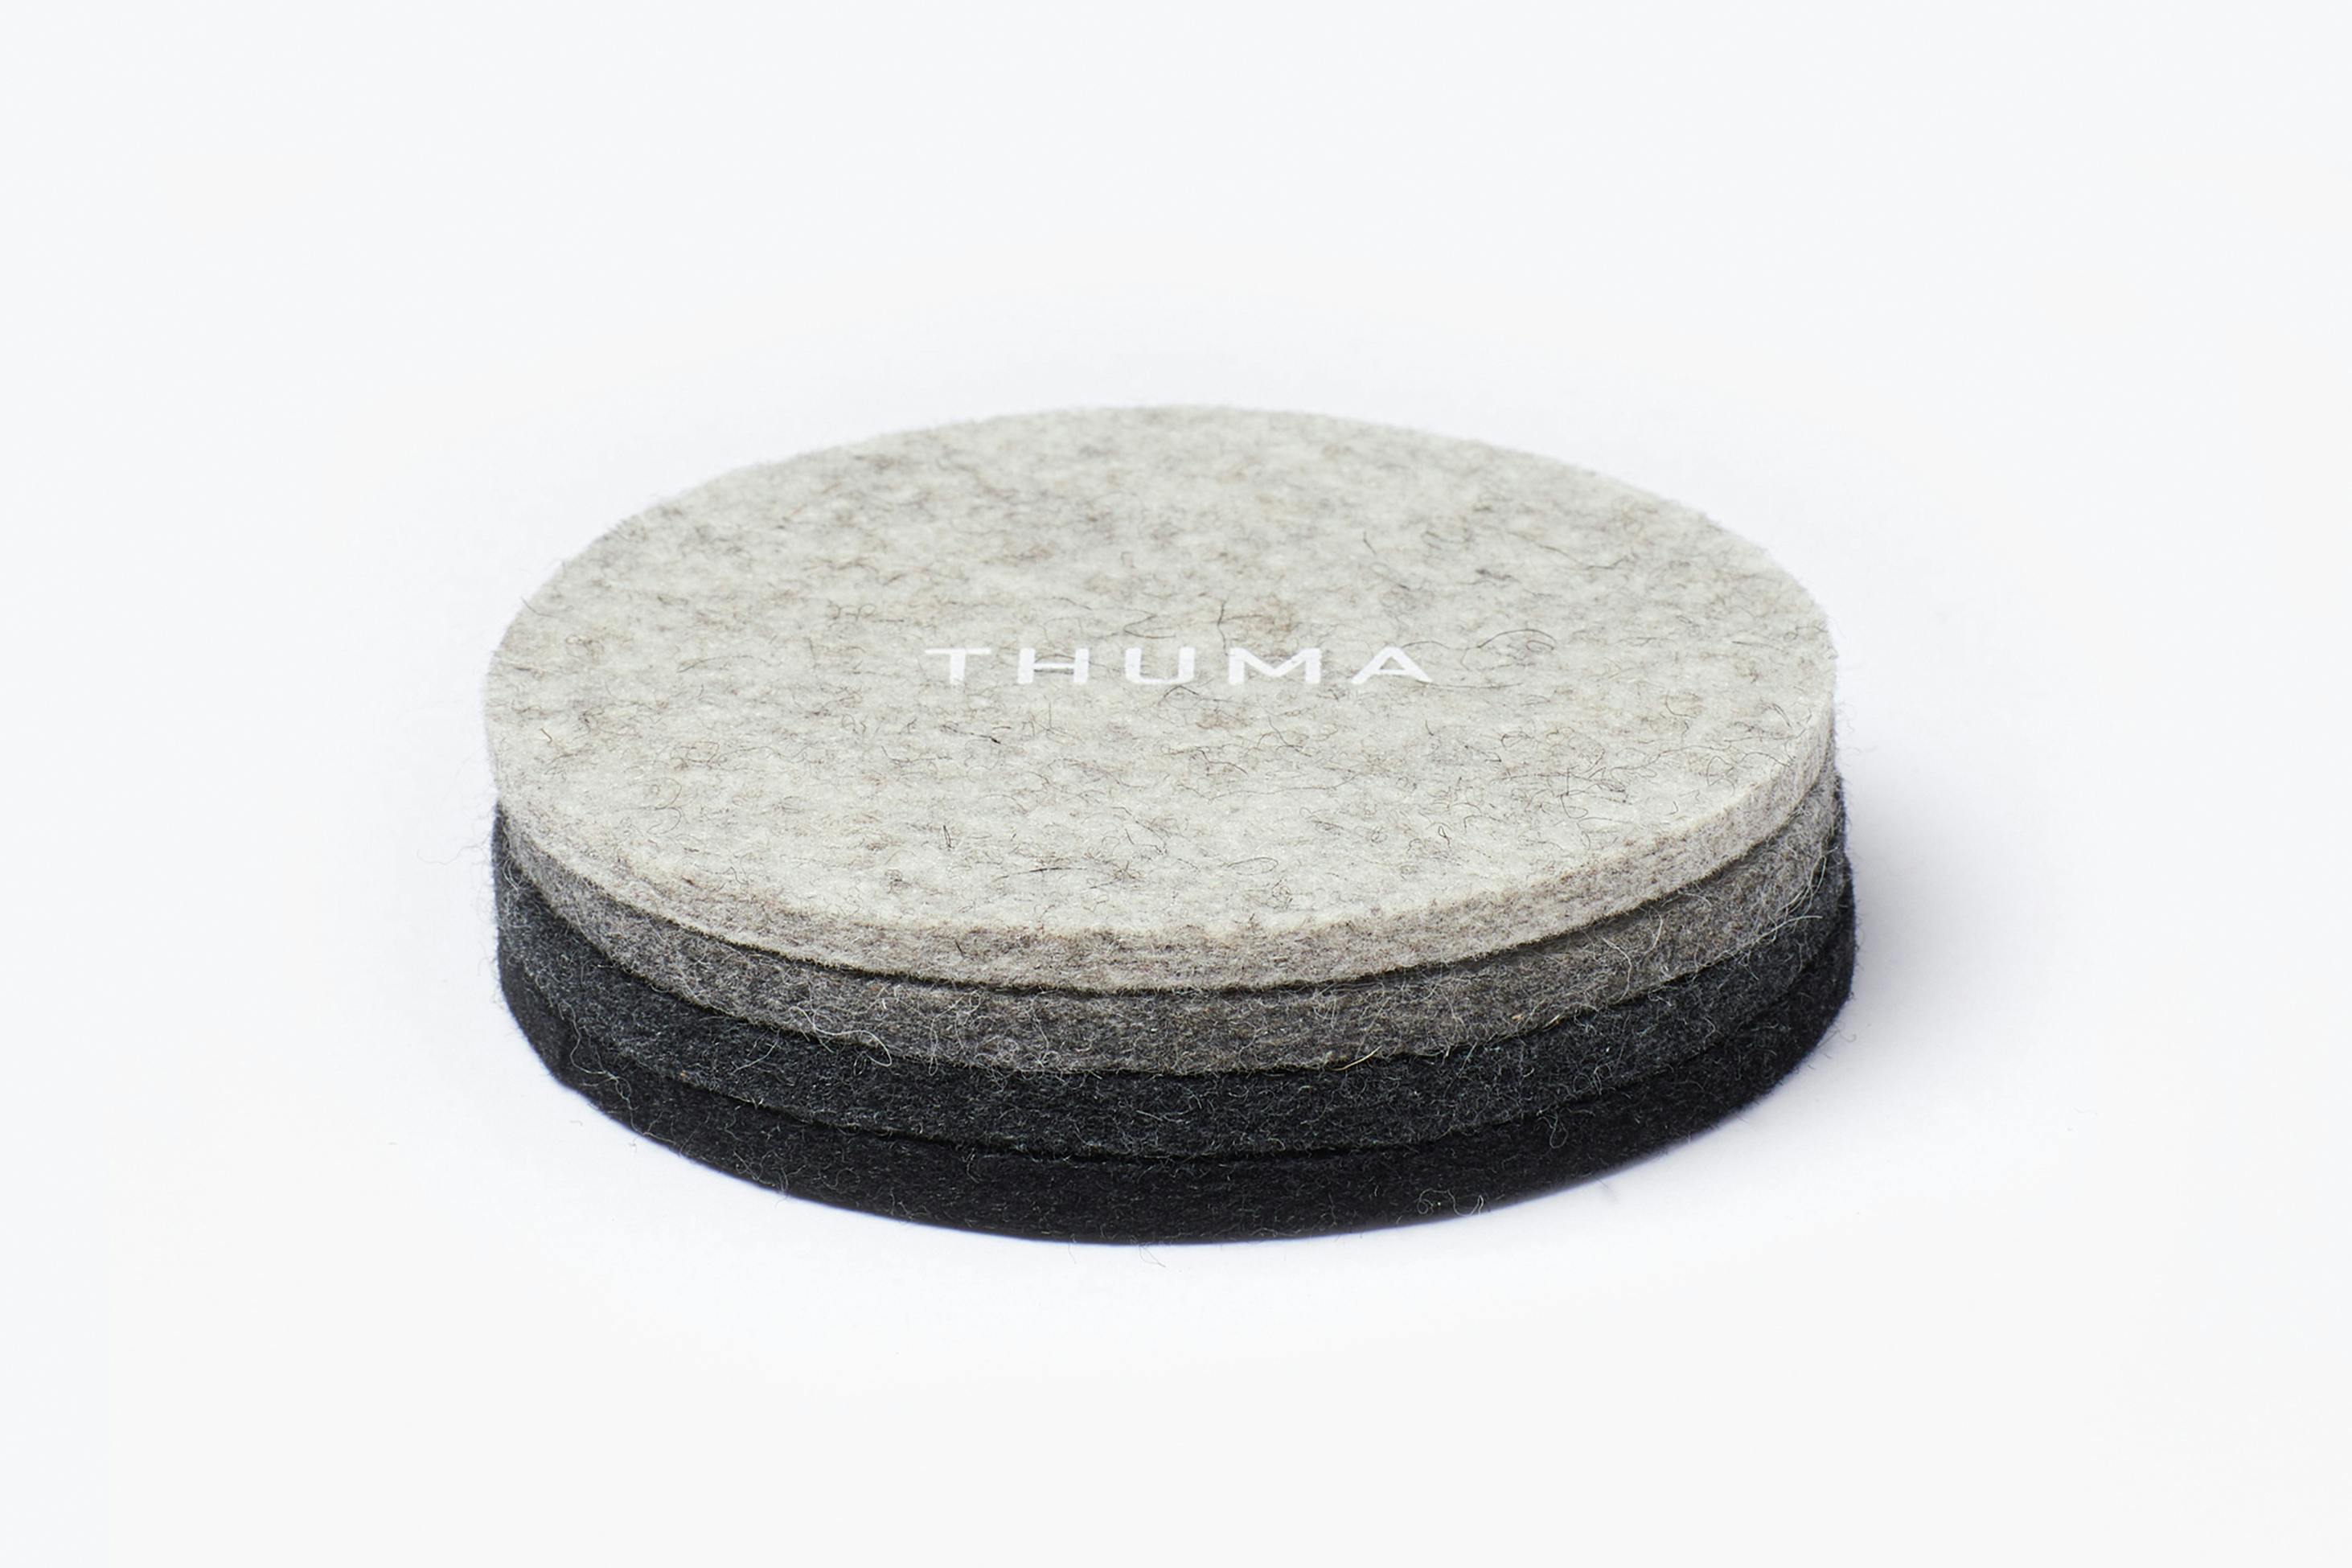 The Felt Coaster Stacked on Table